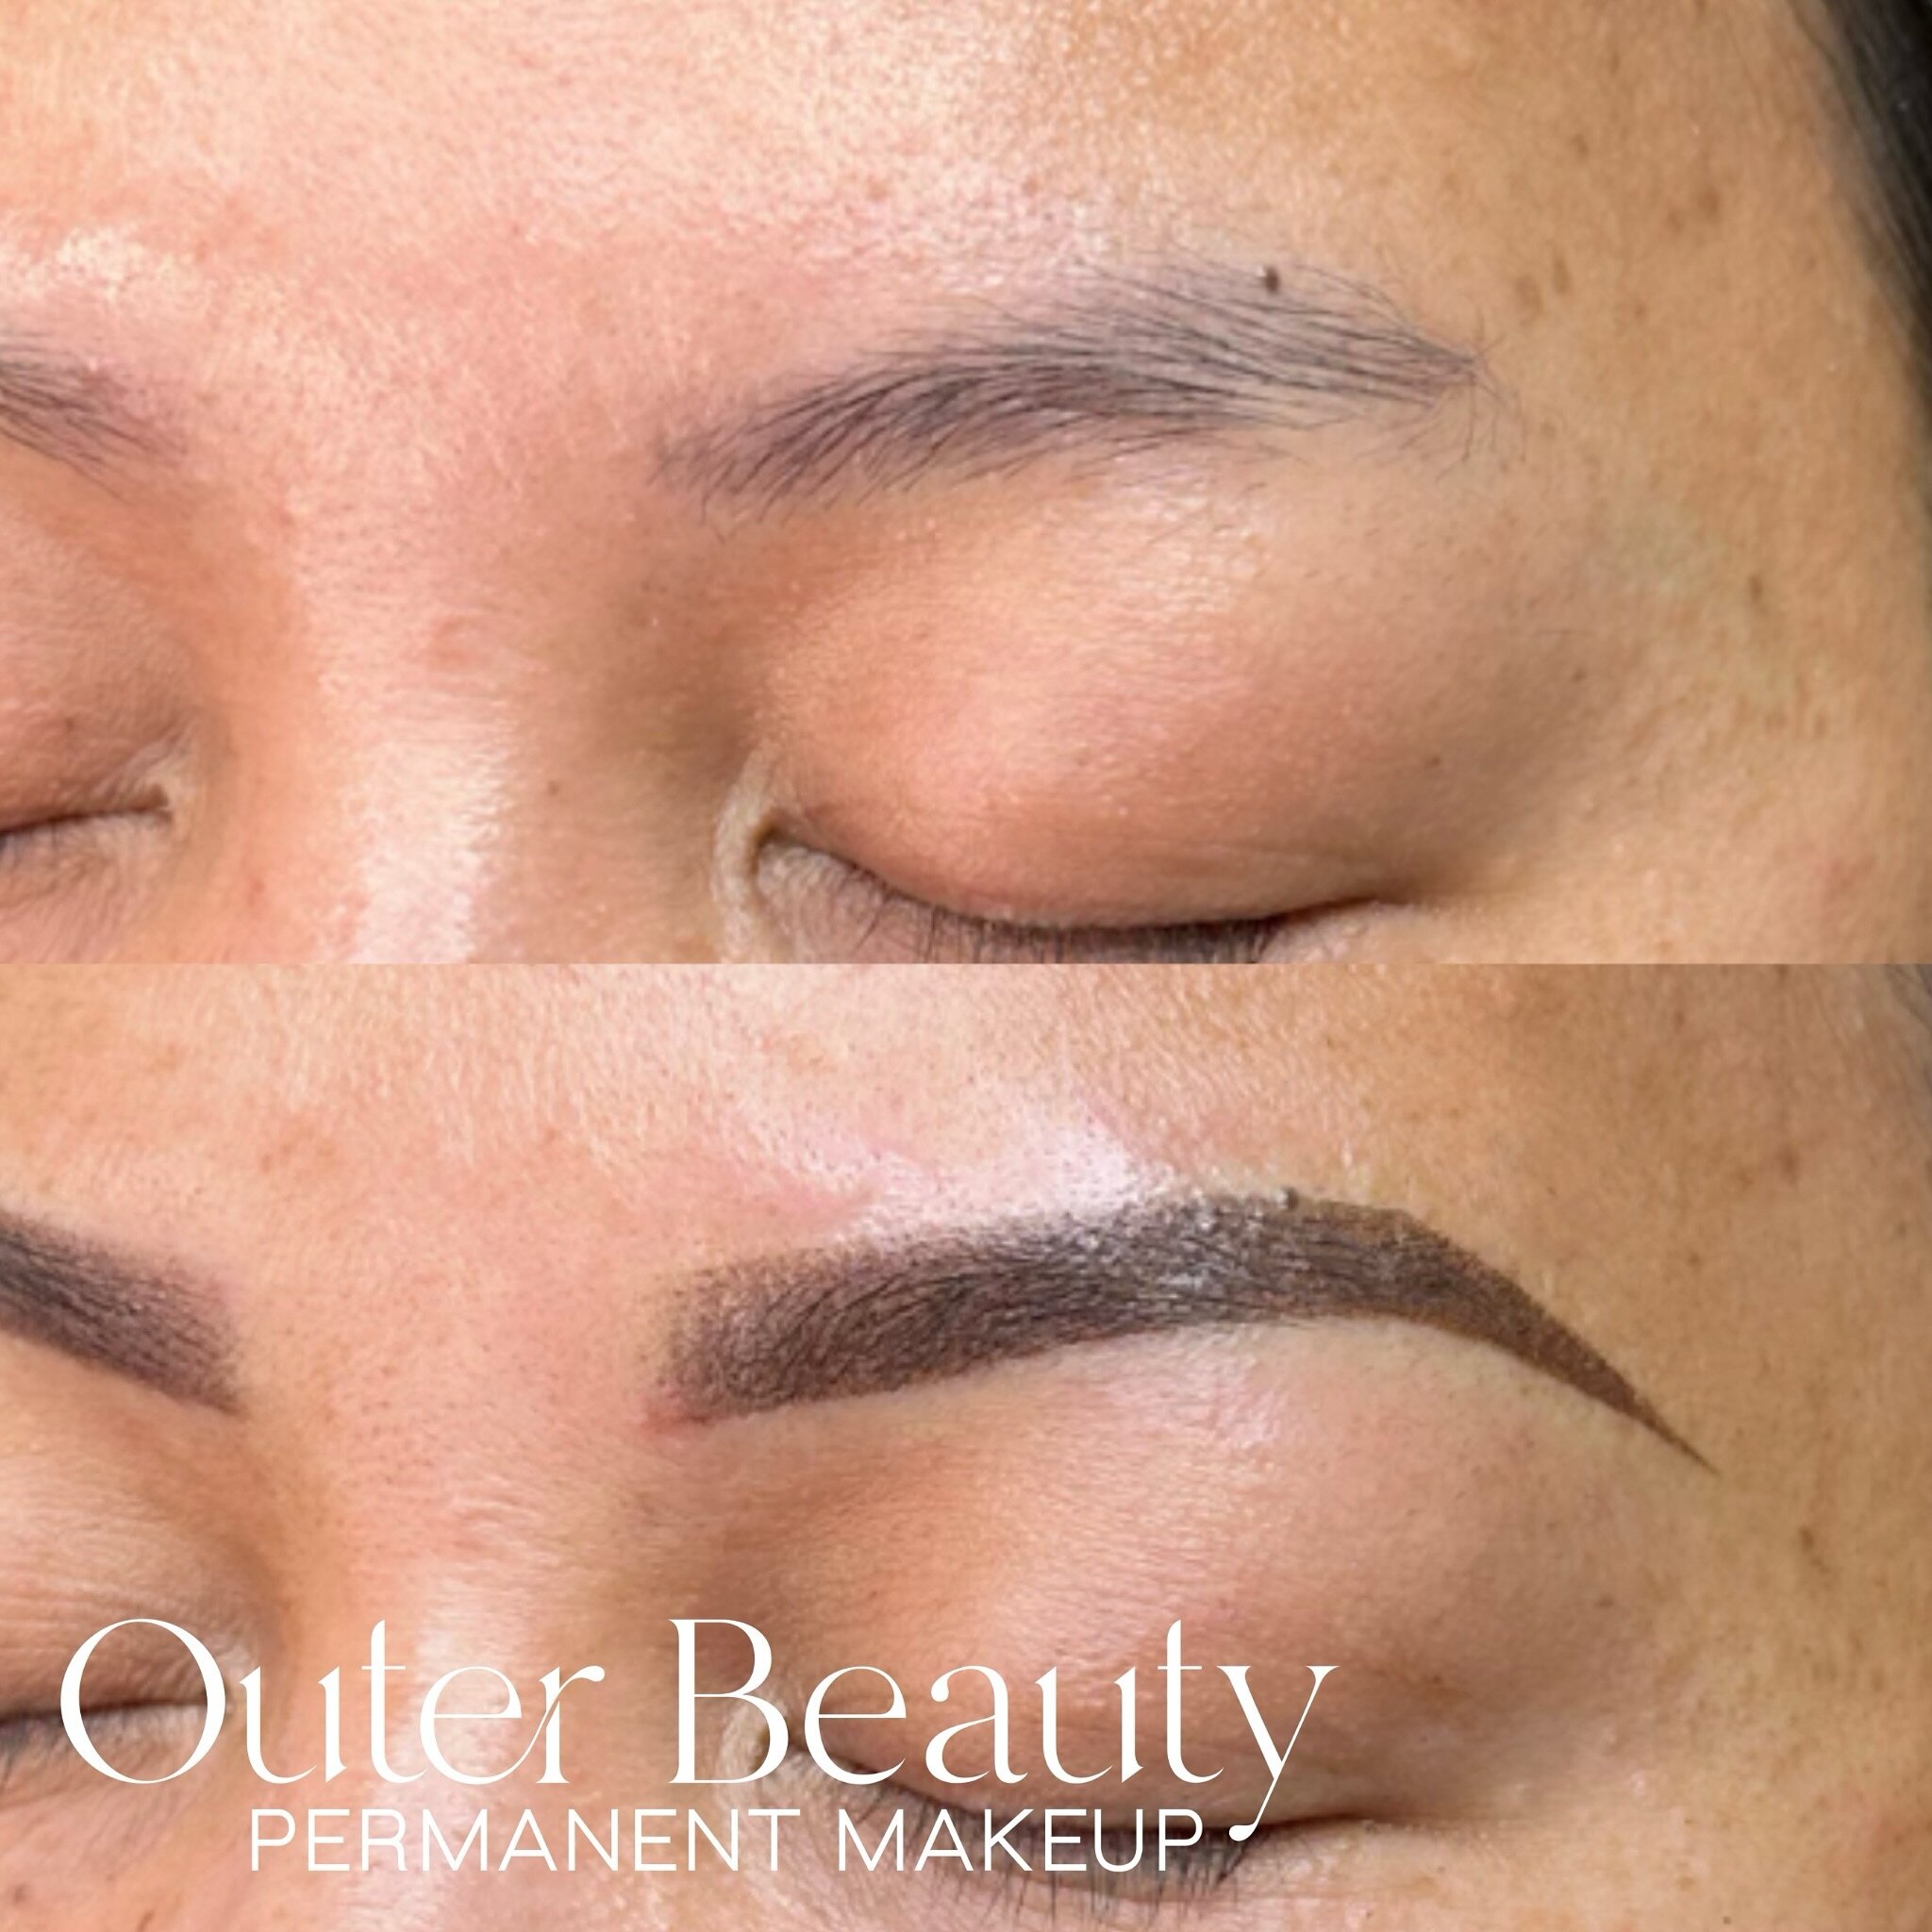 These ombr&eacute; brows 🤩❤️

We have a few spots left for April! Get waterproof brows before summer 🥰 

#minneapolis #minneapolisbrows #minneapolisbrowartist #brooklynparkmn #minnesotabrows #minnesotatattoo #minneapolistattoo #minneapolistattooart